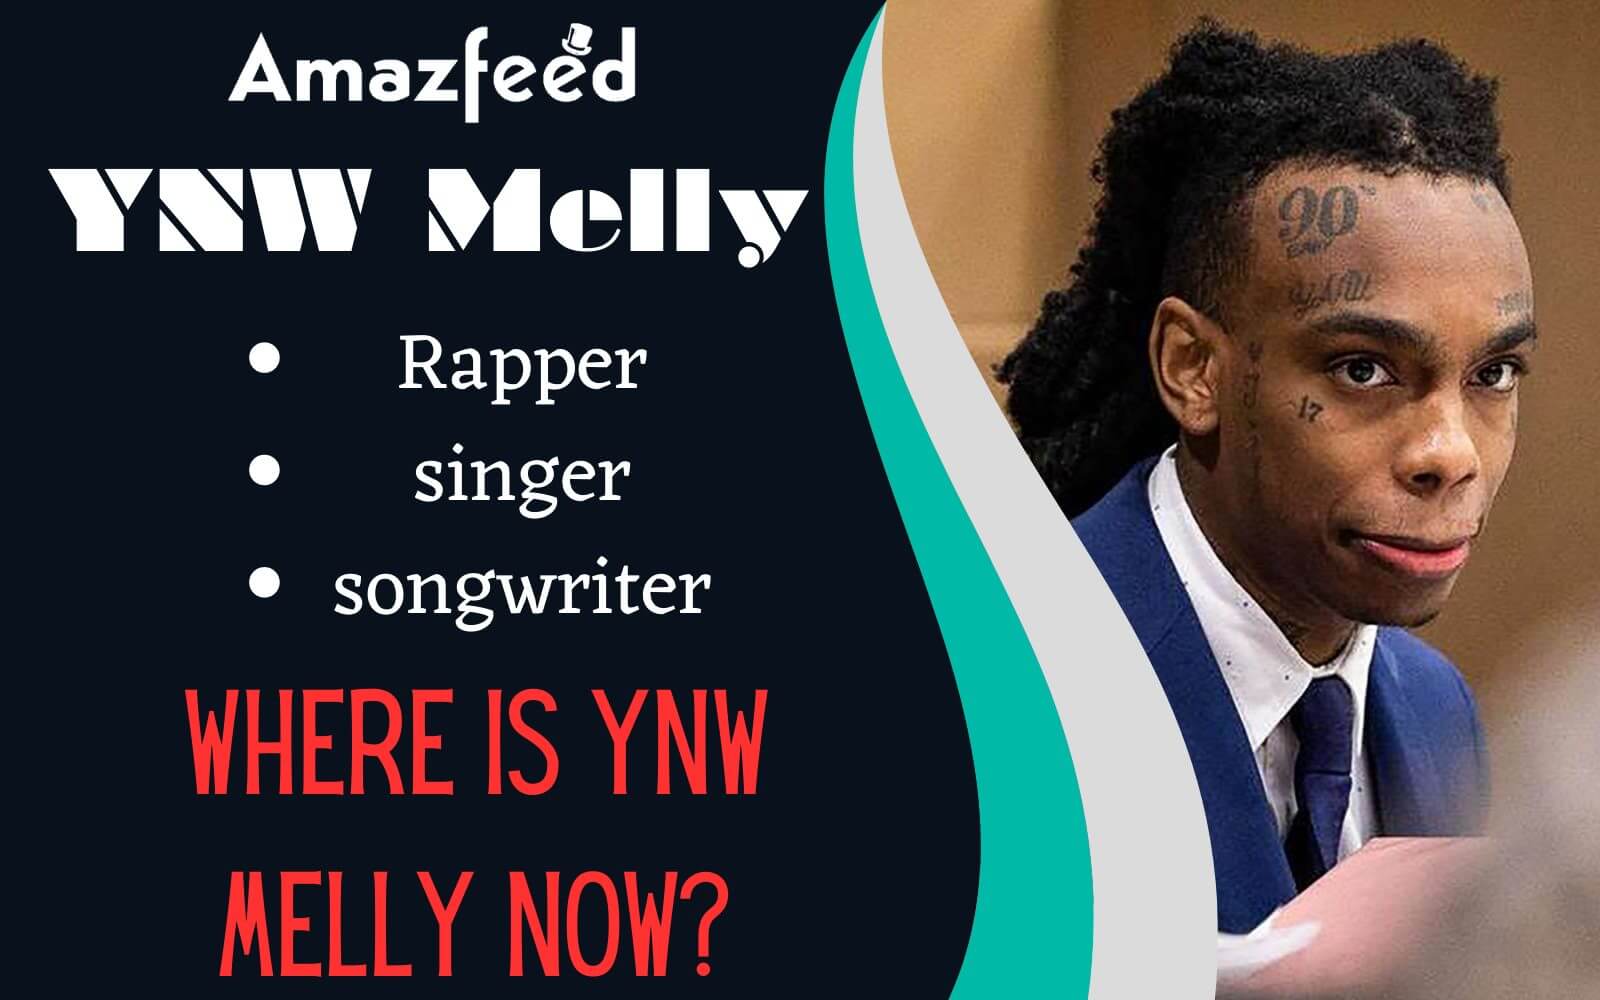 Who is Ynw Melly